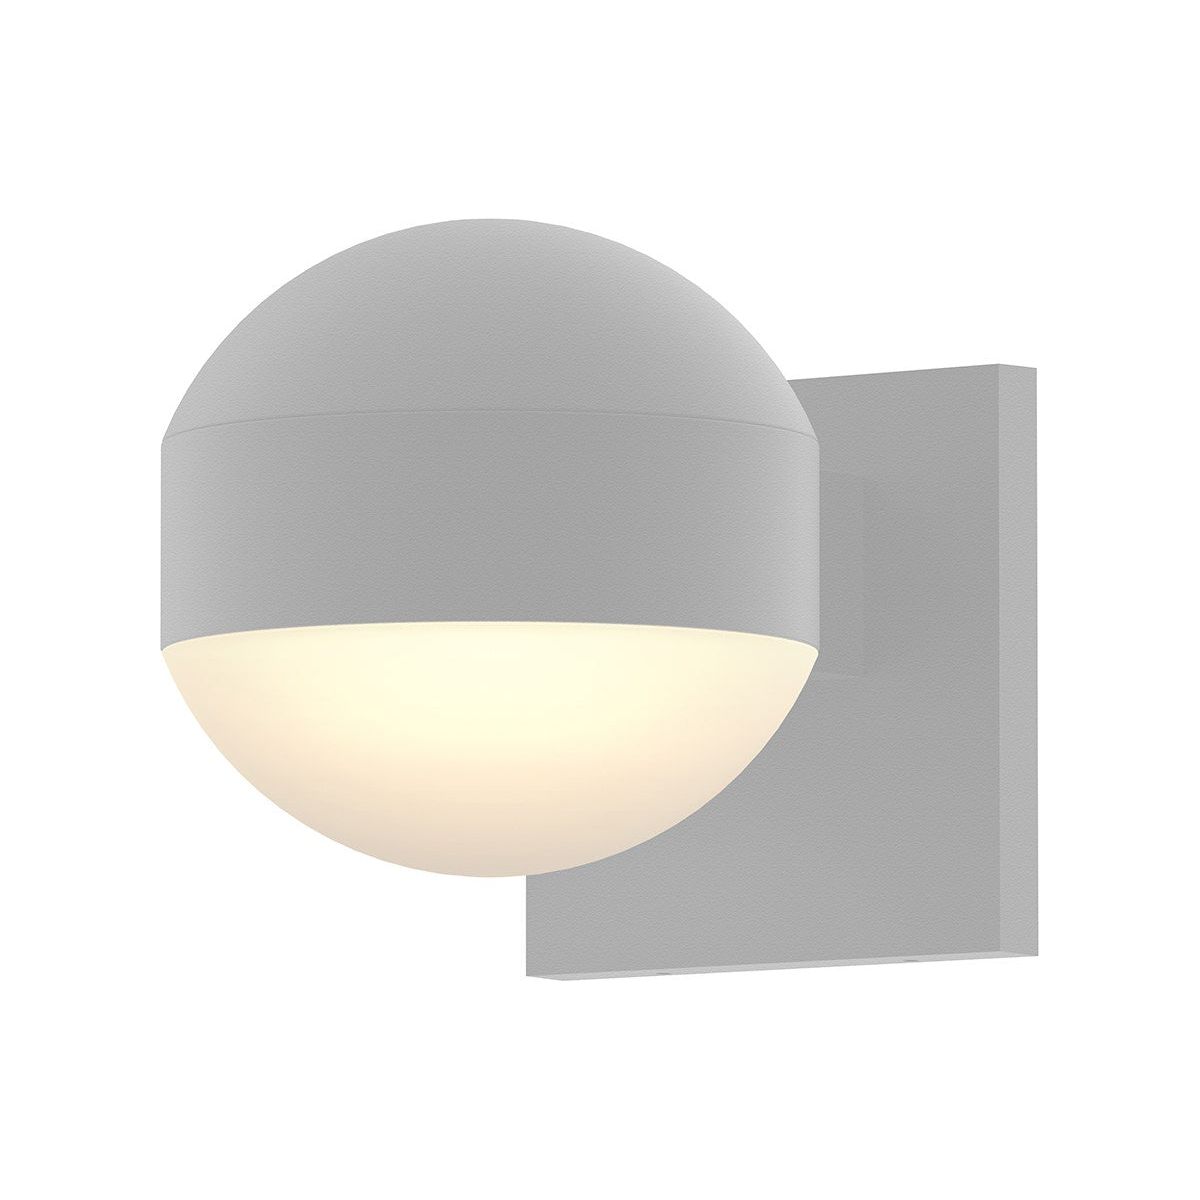 REALS Downlight LED Sconce with Dome Cap and Dome Lens